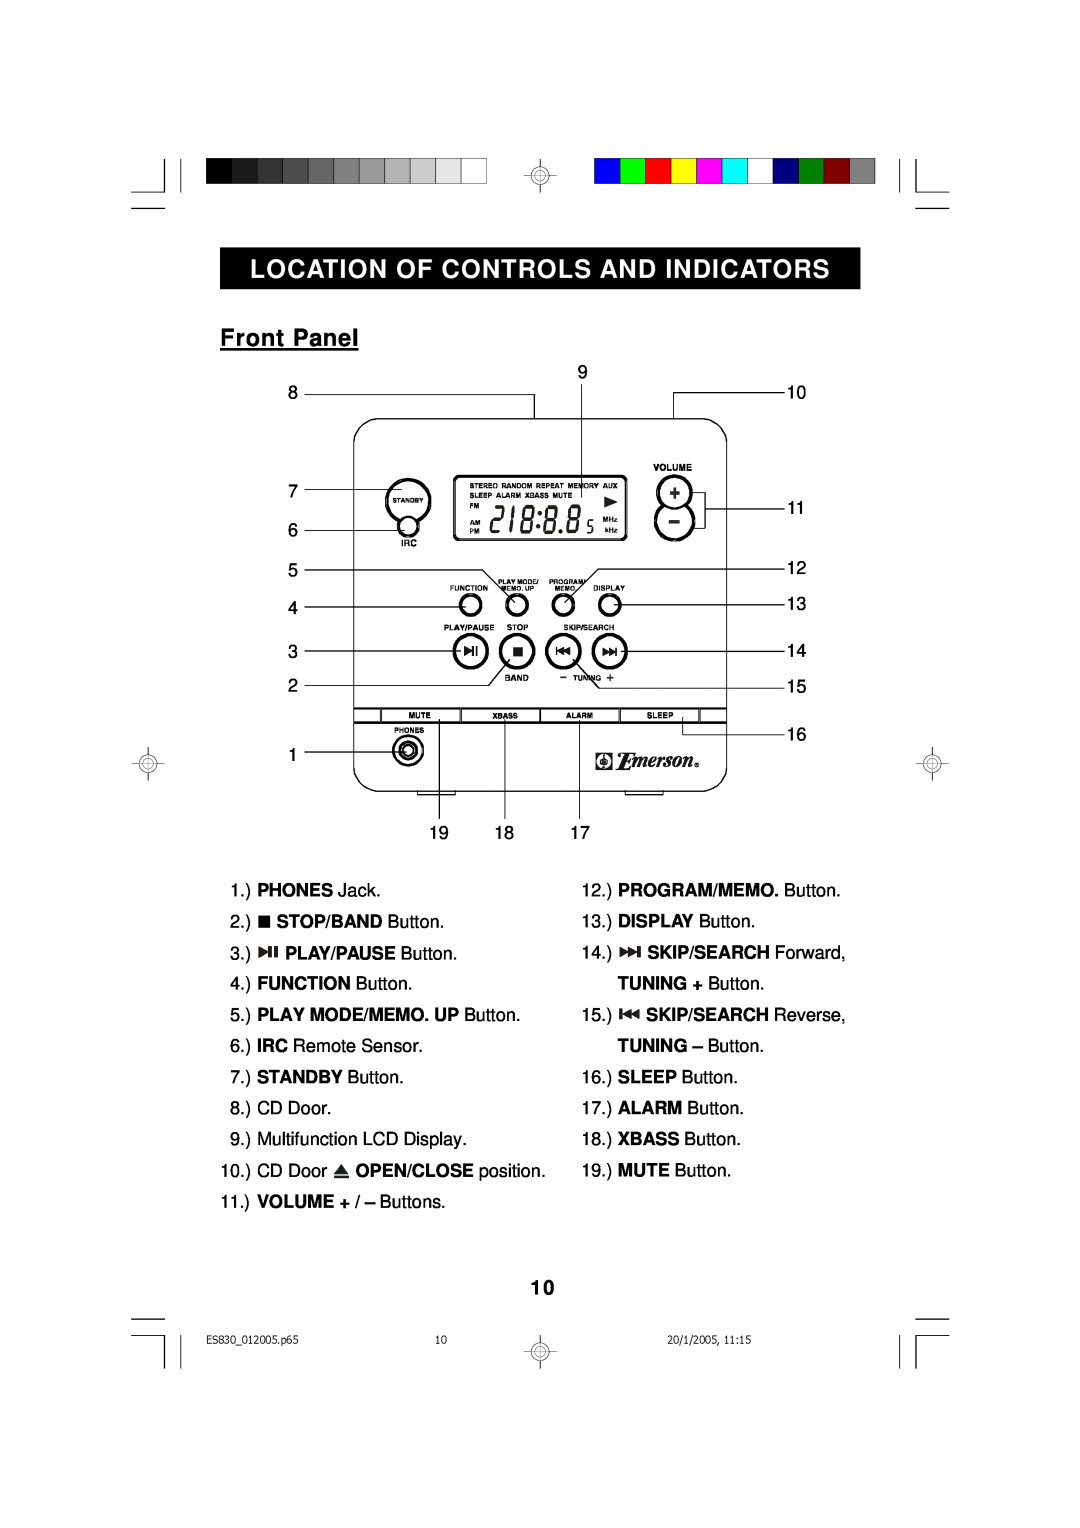 Emerson ES830 owner manual Location Of Controls And Indicators, Front Panel 